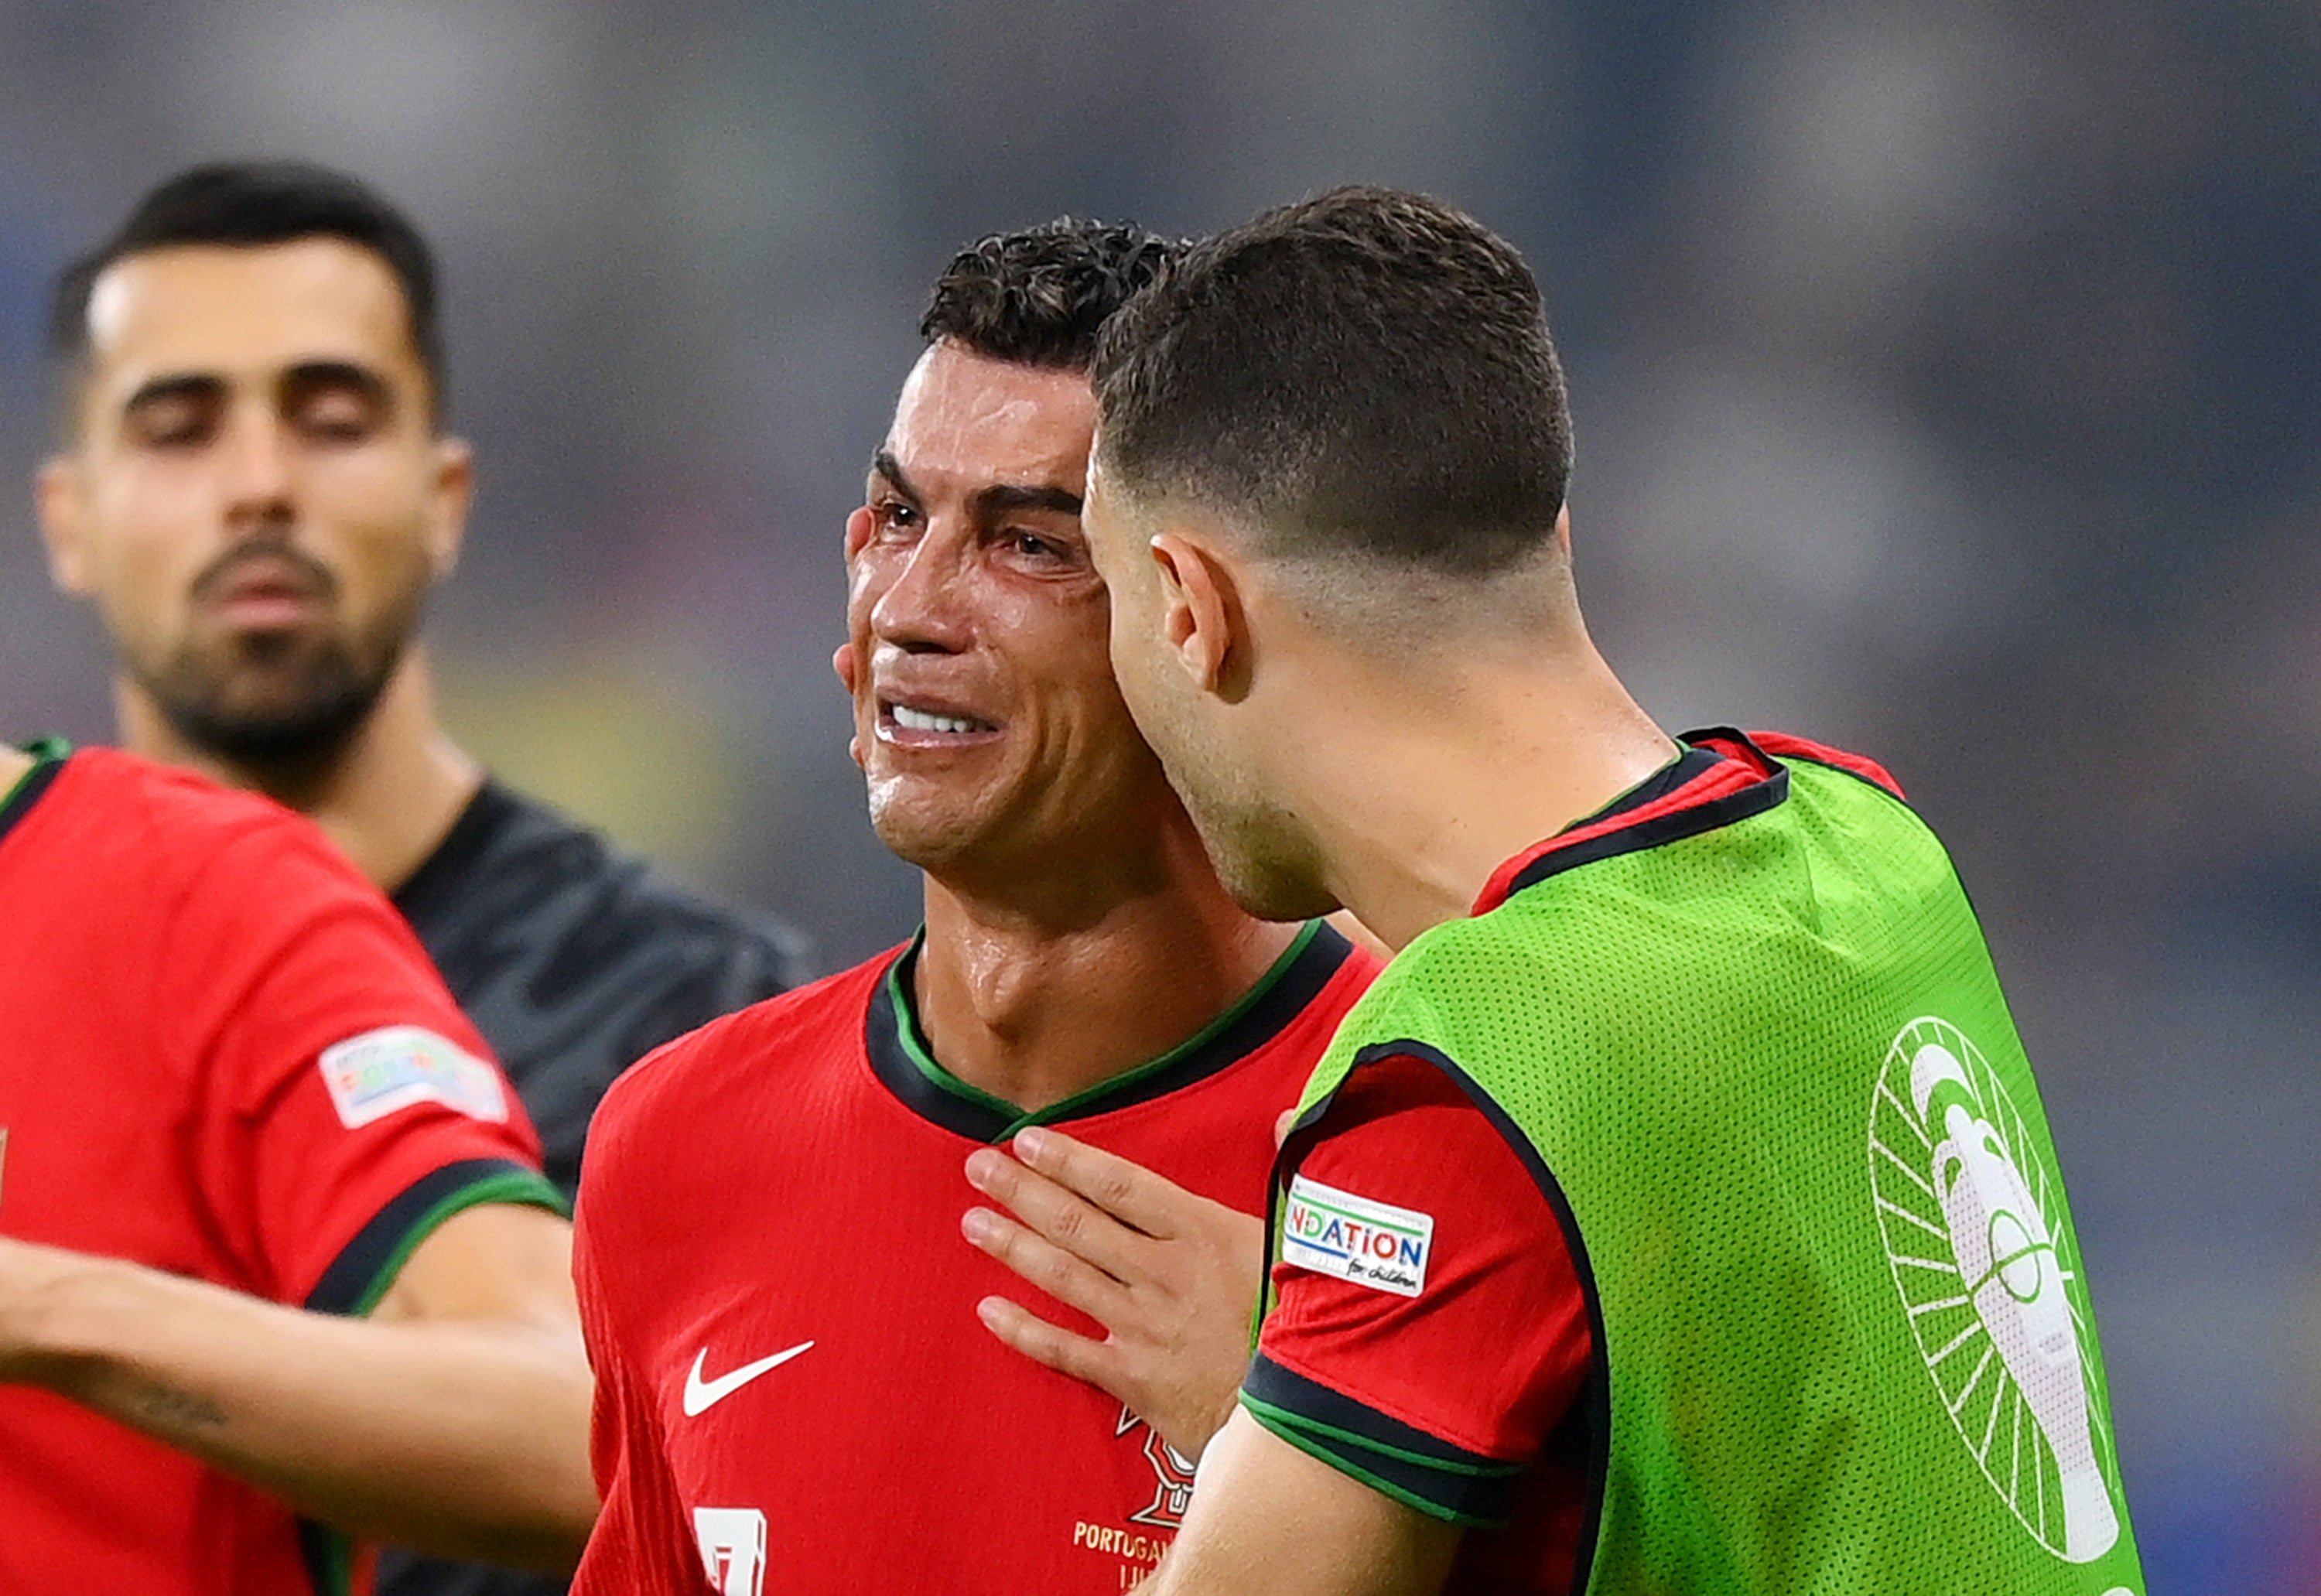 Cristiano Ronaldo weeps after missing a penalty in extra time